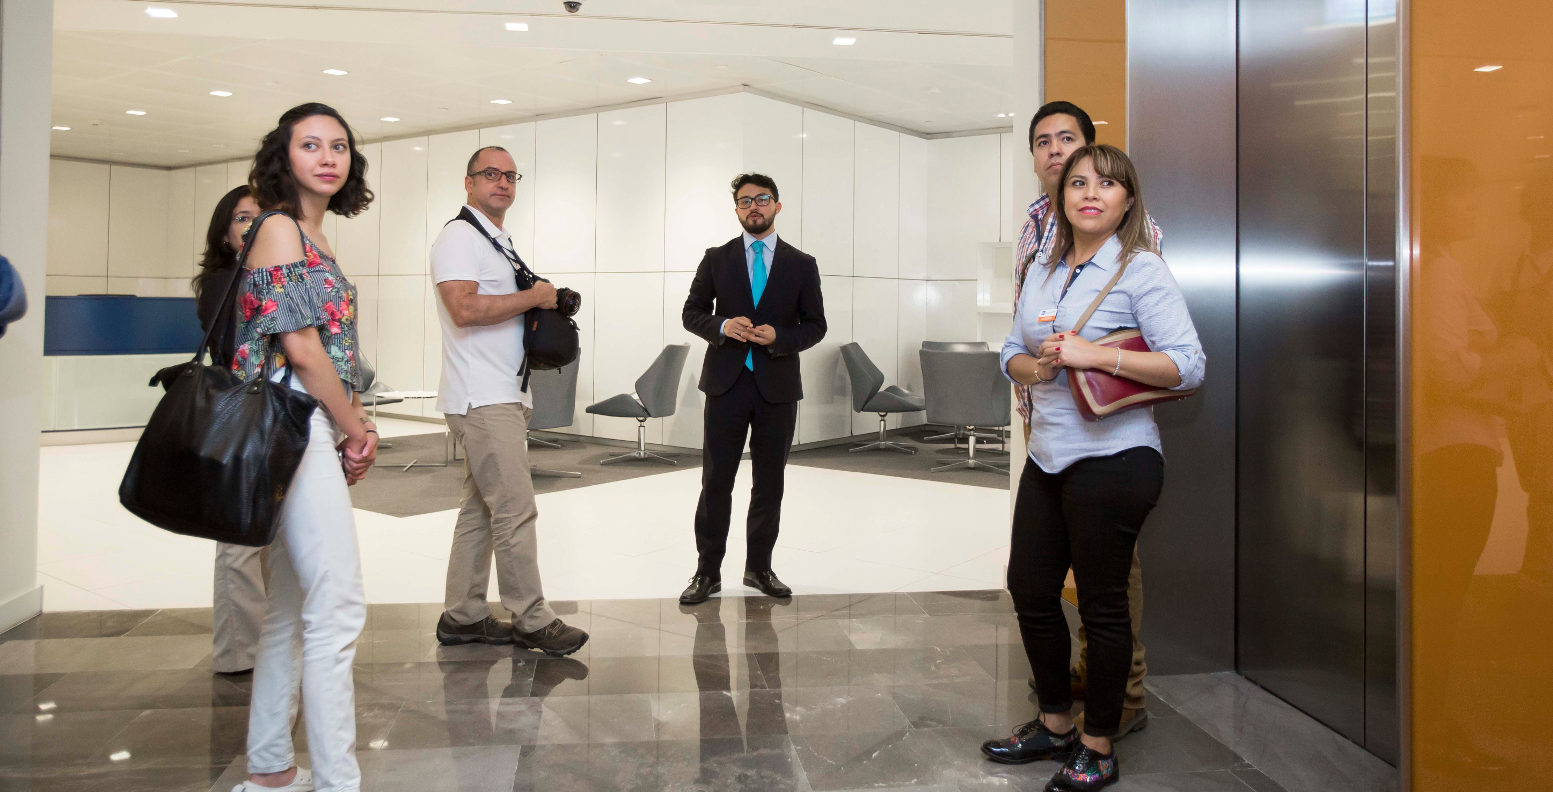 Open House Torre Bancomer. Piso 33 Bussines Center